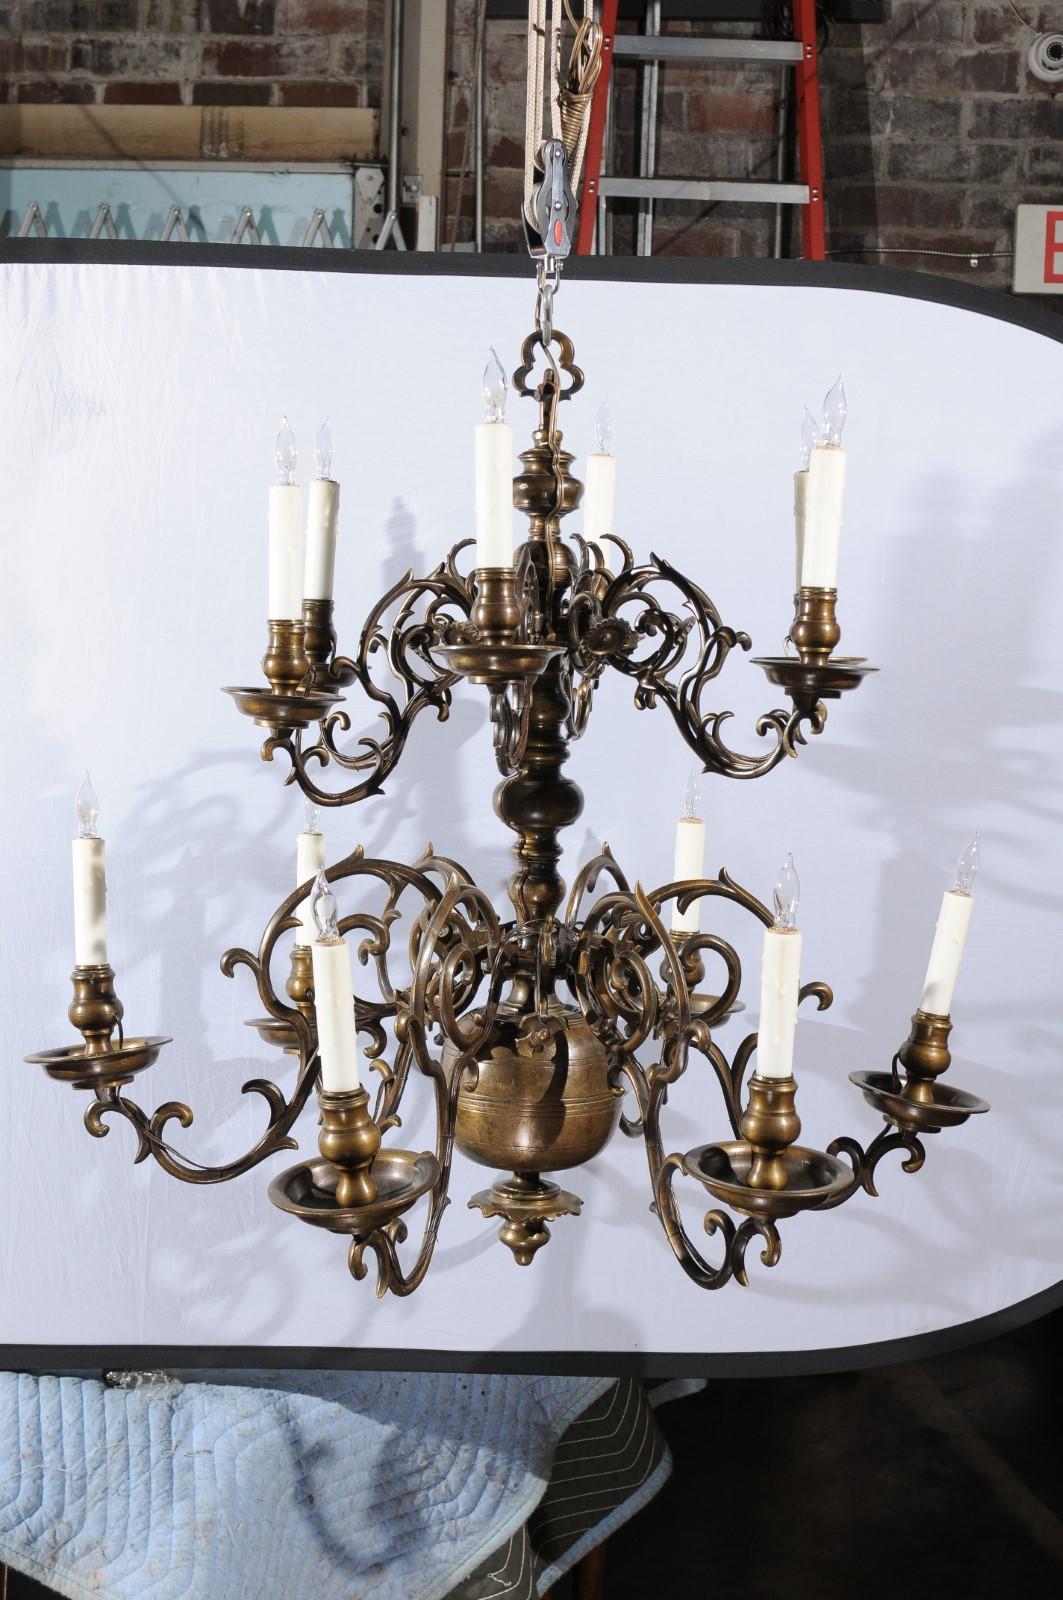 Large 2-Tier Dutch Brass Chandelier with 12 Lights, 18th Century For Sale 9